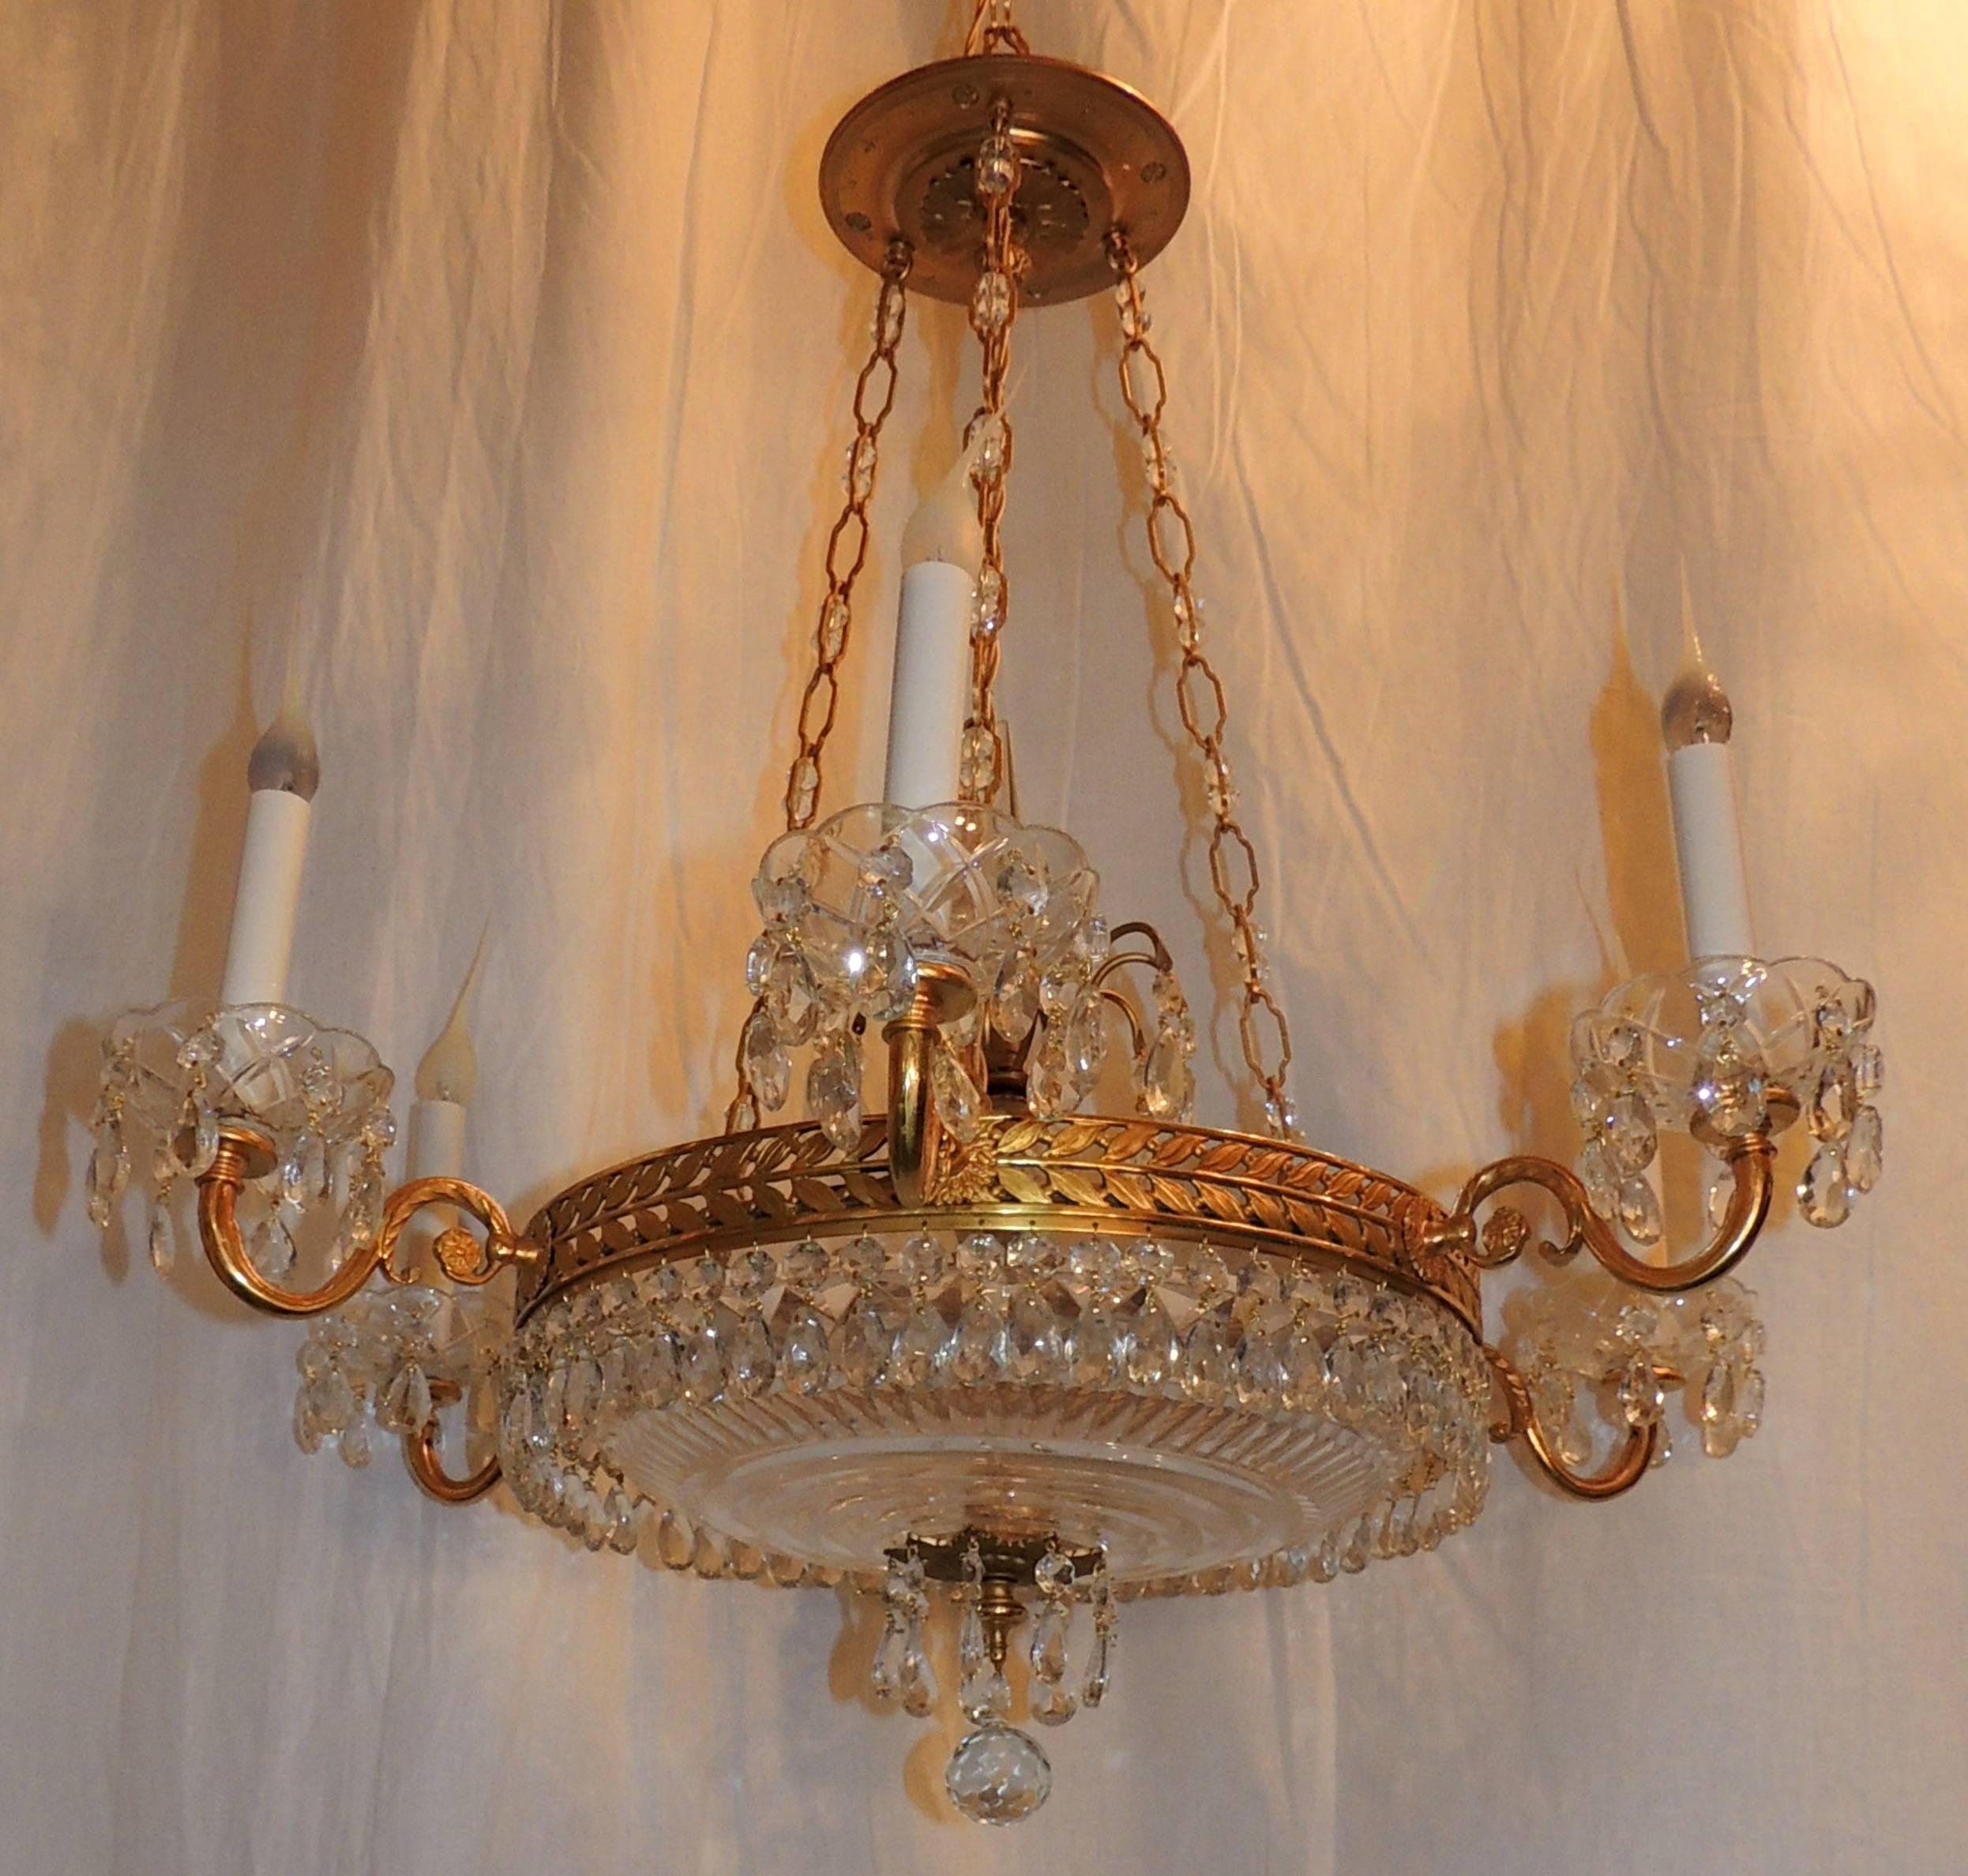 Wonderful French Dore Bronze Neoclassical Baltic Crystal Bowl Empire Chandelier In Fair Condition For Sale In Roslyn, NY